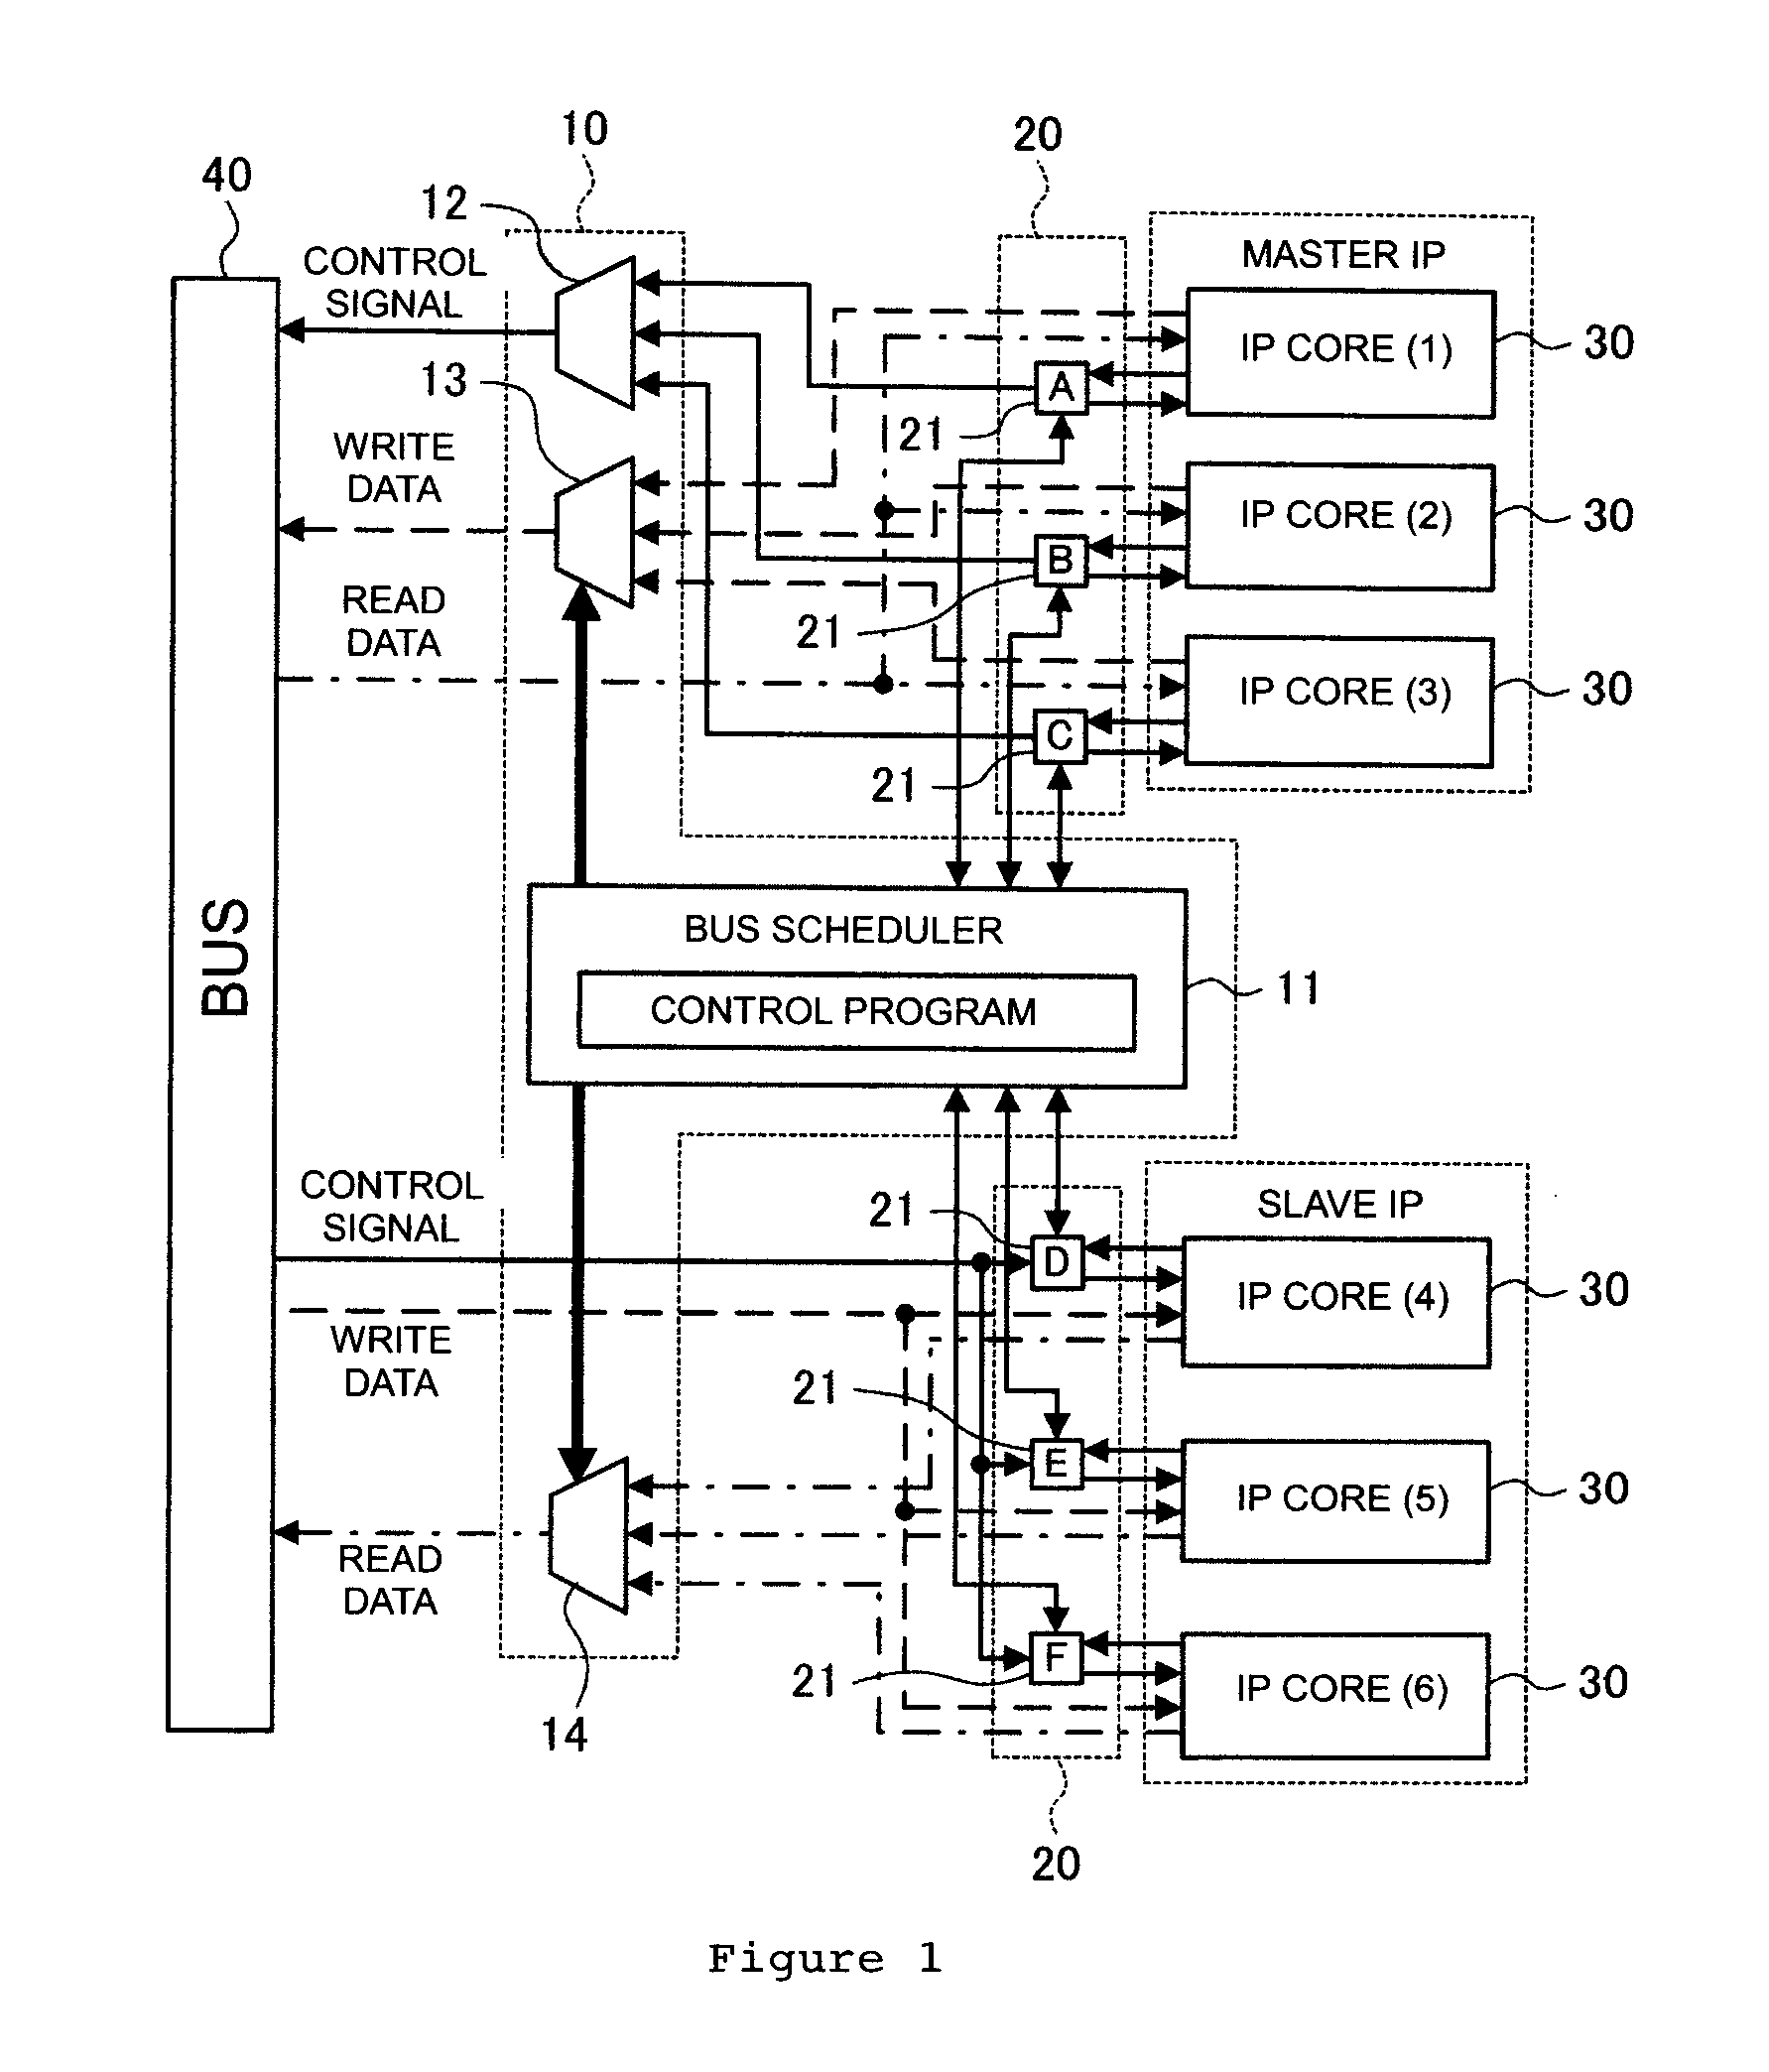 Bus access control apparatus and method